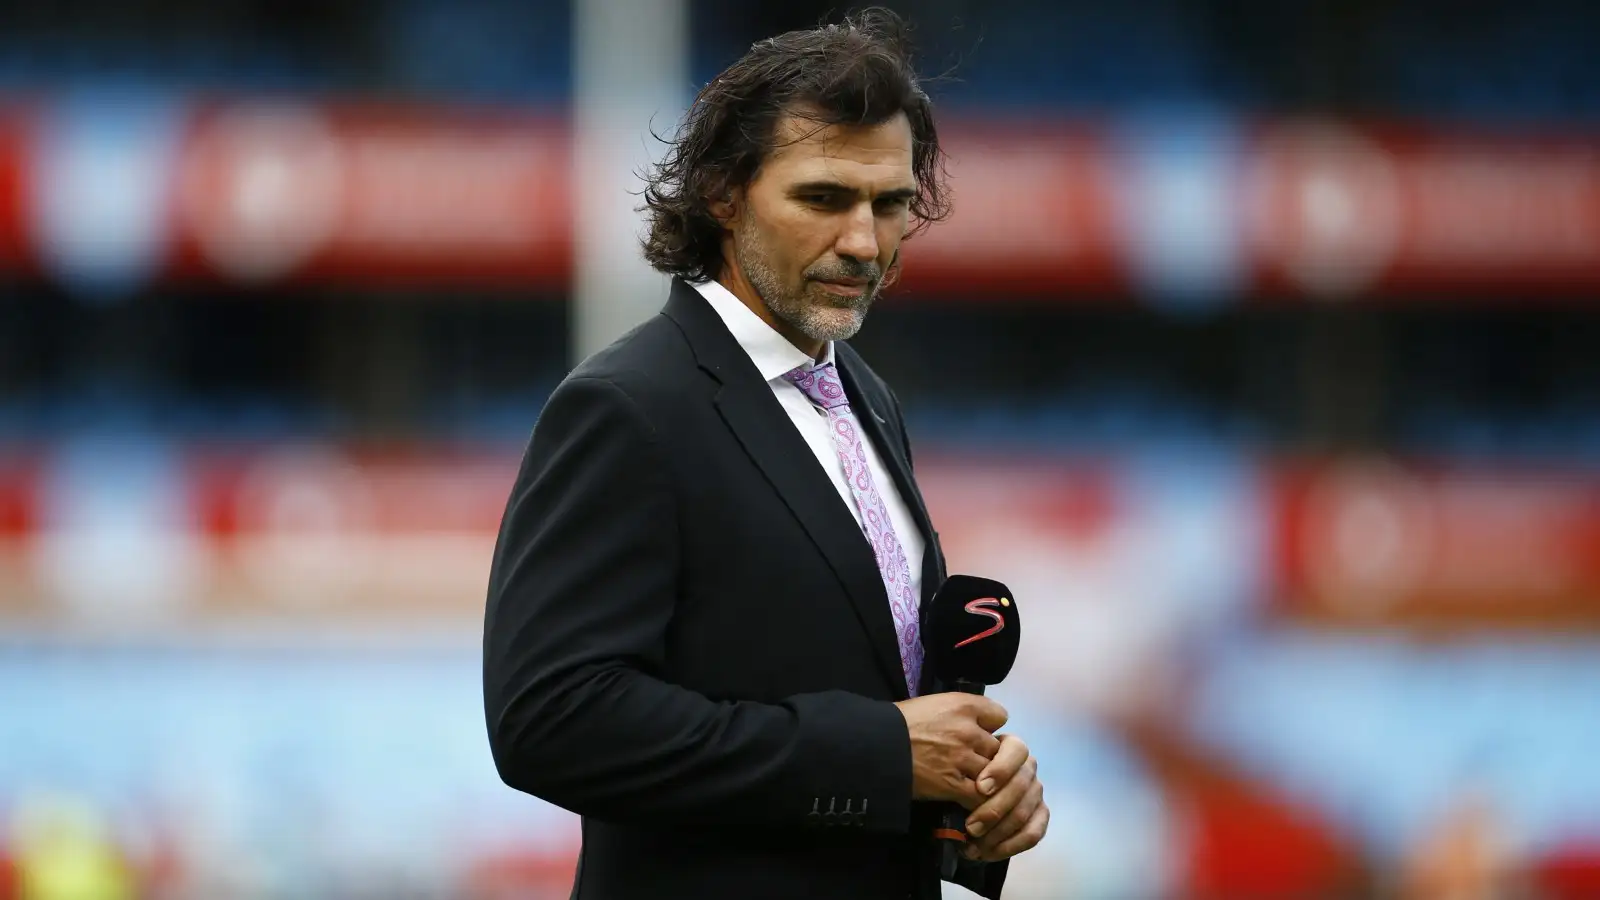 Springboks: Victor Matfield looks on with a microphone in hand